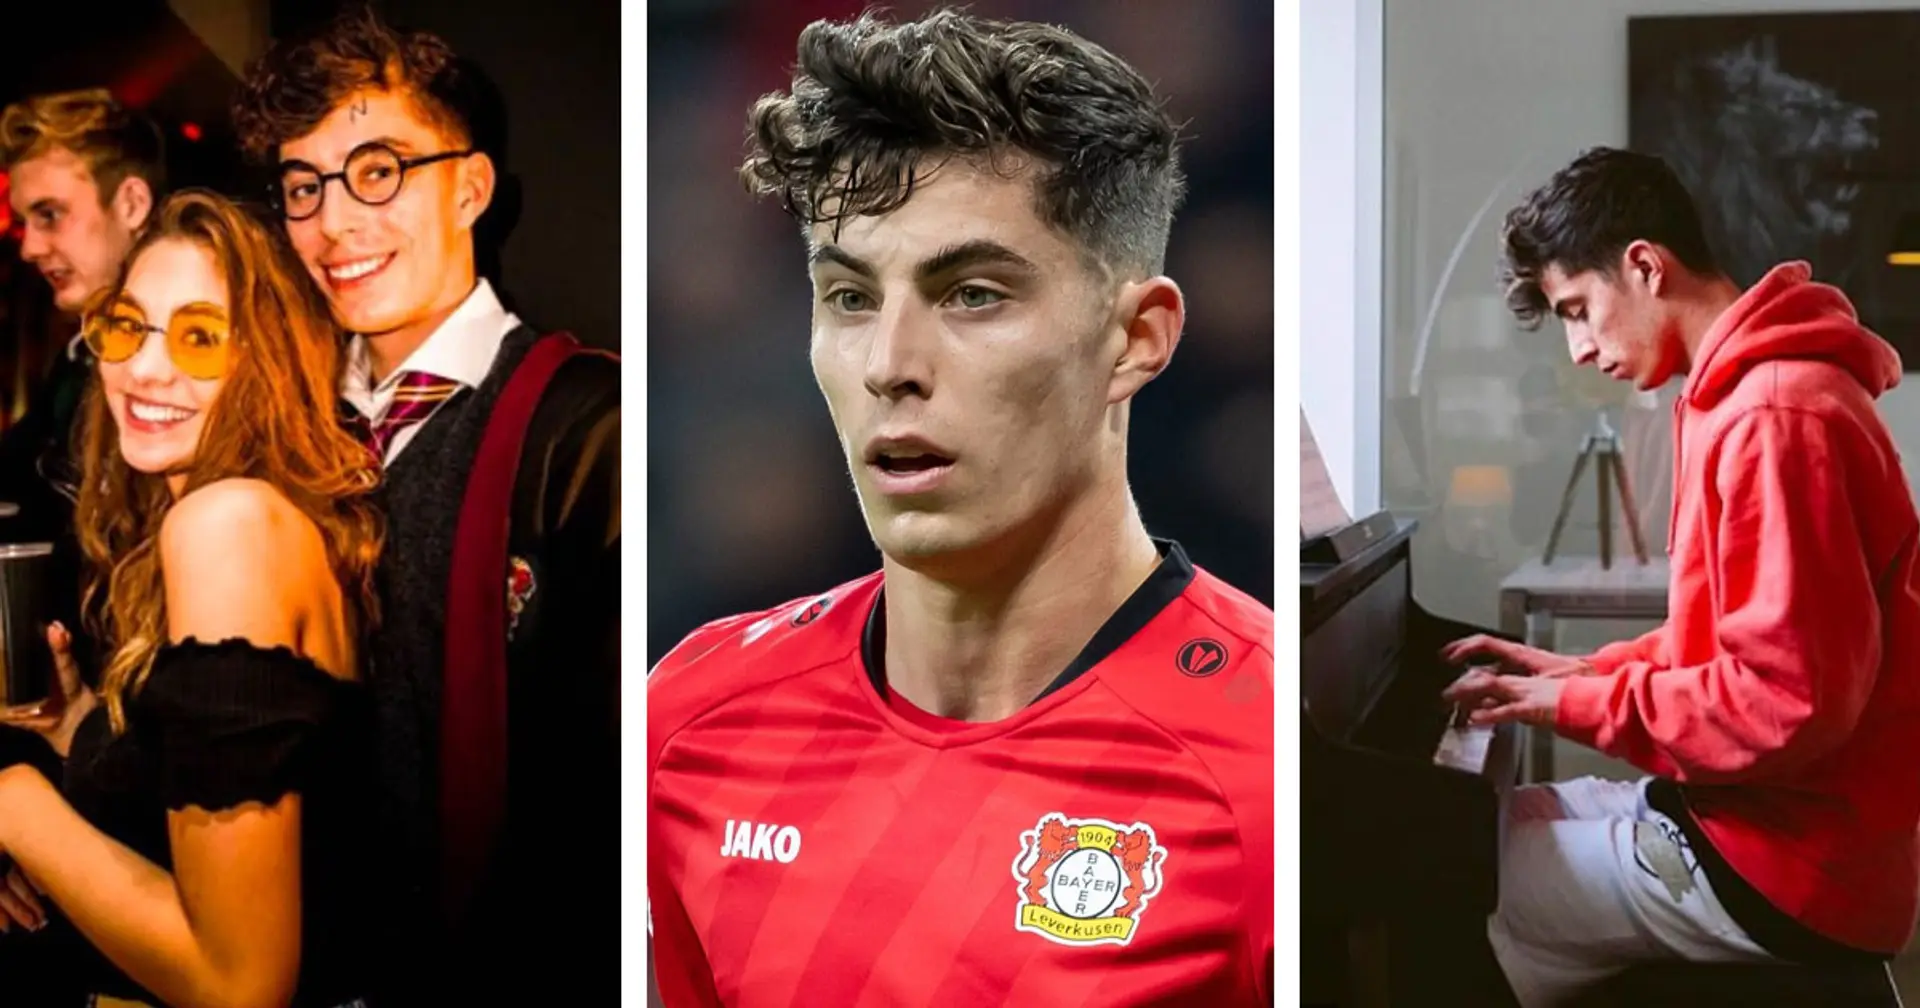 4 off-the-pitch talents 'jack of all trades' Kai Havertz boasts 